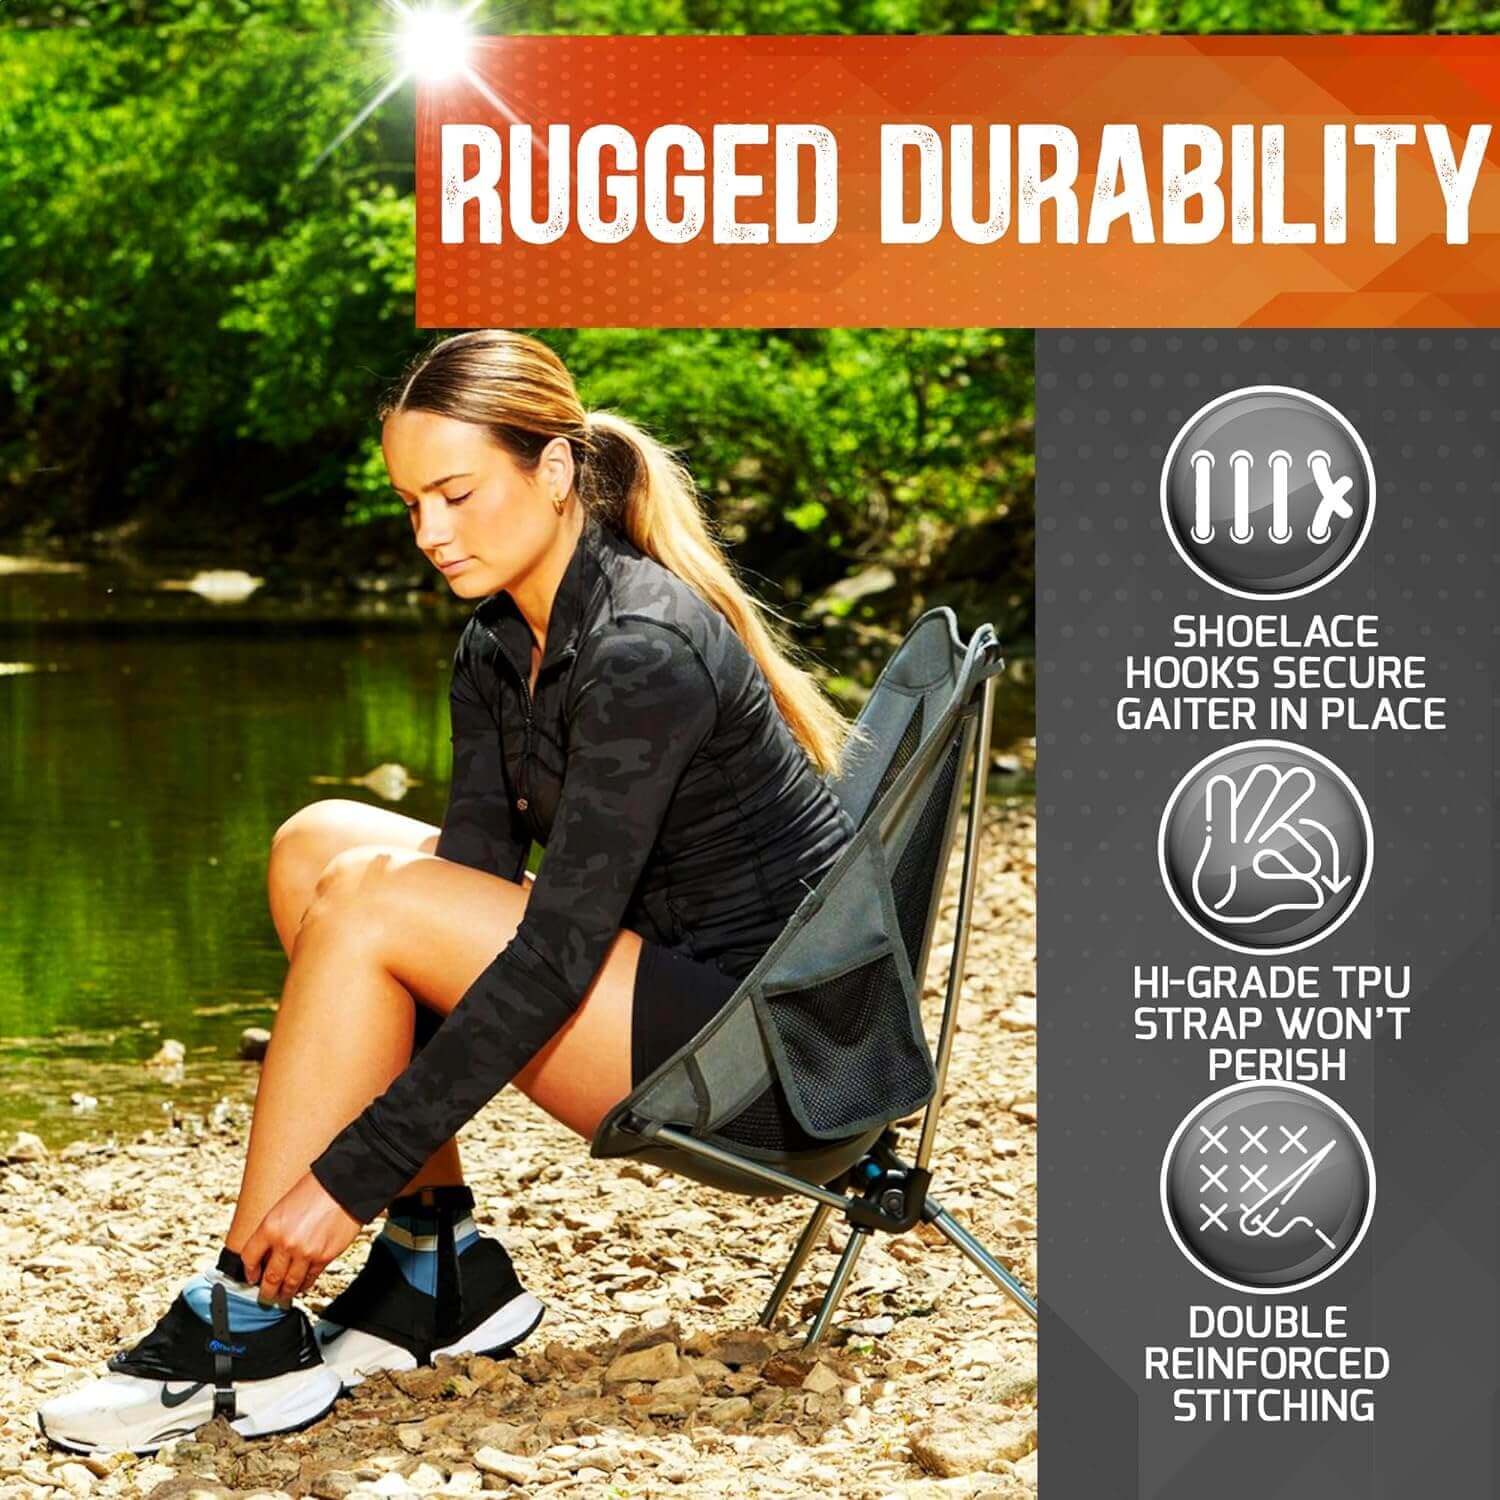 Shop The Latest >Ankle Gaiters for Running - Low Cut Shoe Protectors > *Only $33.74*> From The Top Brand > *Pike Traill* > Shop Now and Get Free Shipping On Orders Over $45.00 >*Shop Earth Foot*